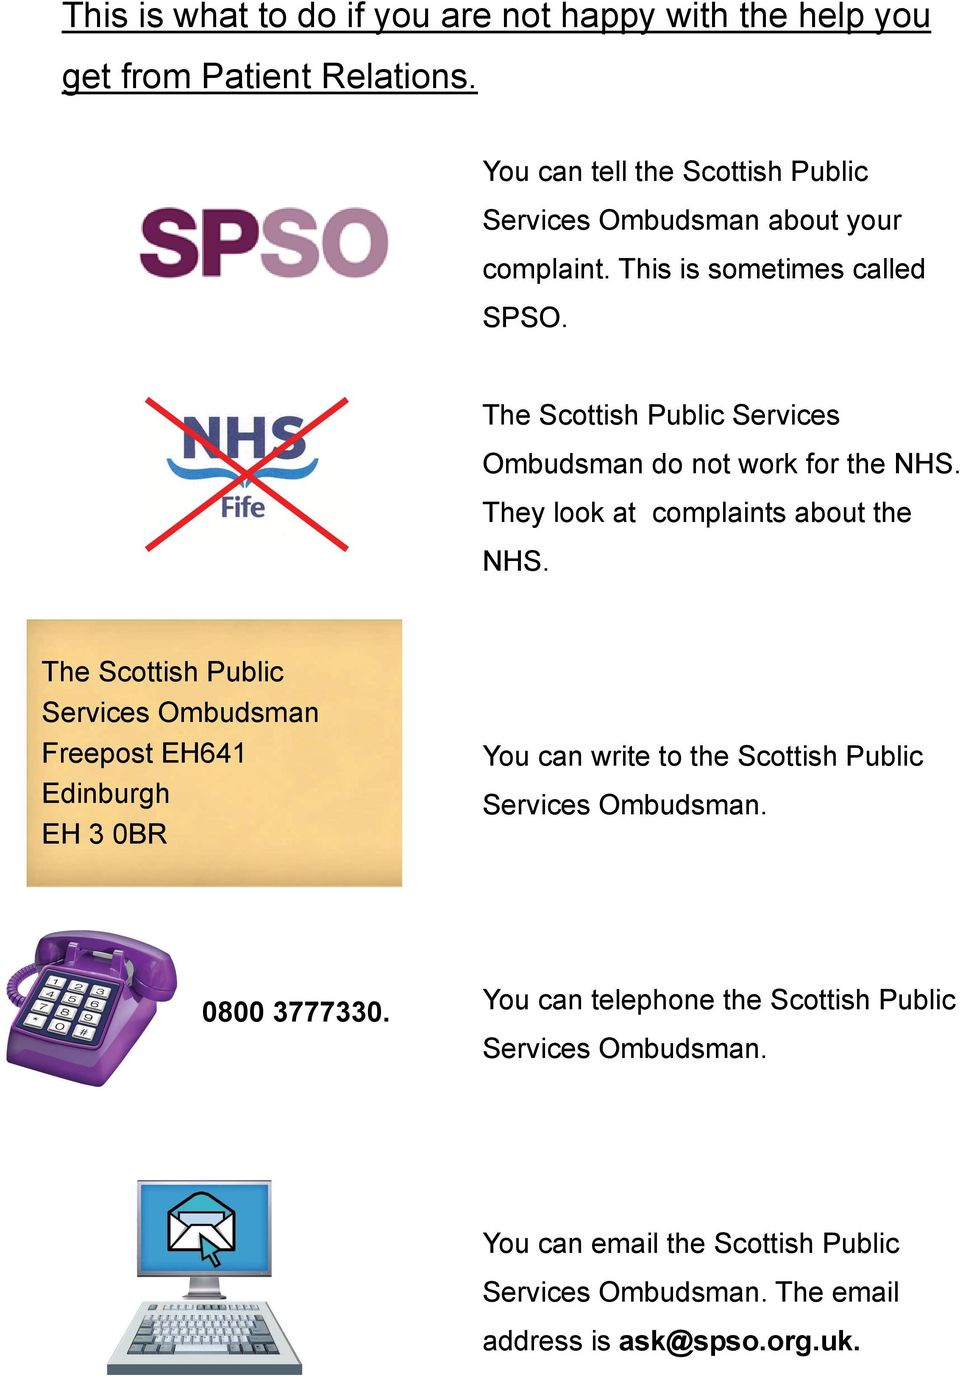 The Scottish Public Services Ombudsman do not work for the NHS. They look at complaints about the NHS.